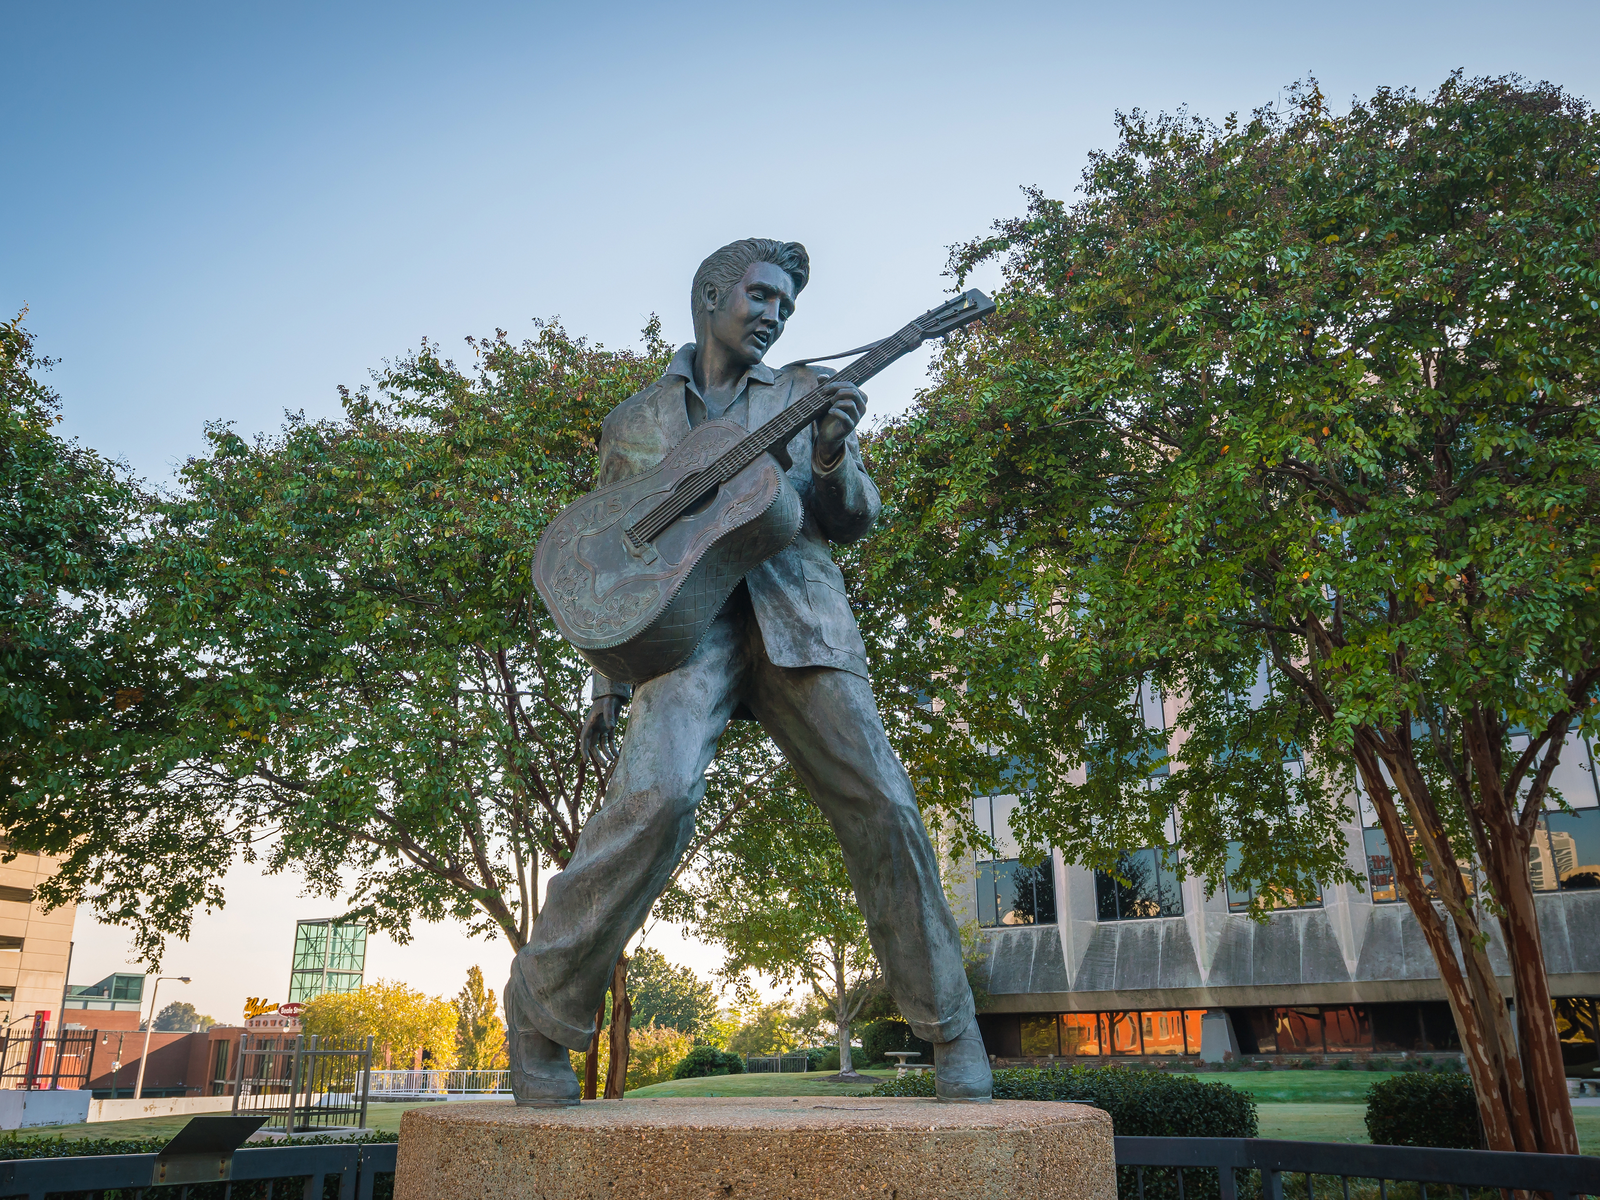 Statue of Elvis Presley on his signature pose and passionately holding a guitar in Elvis Presley Plaza, Memphis, one of the best places to visit in Tennessee